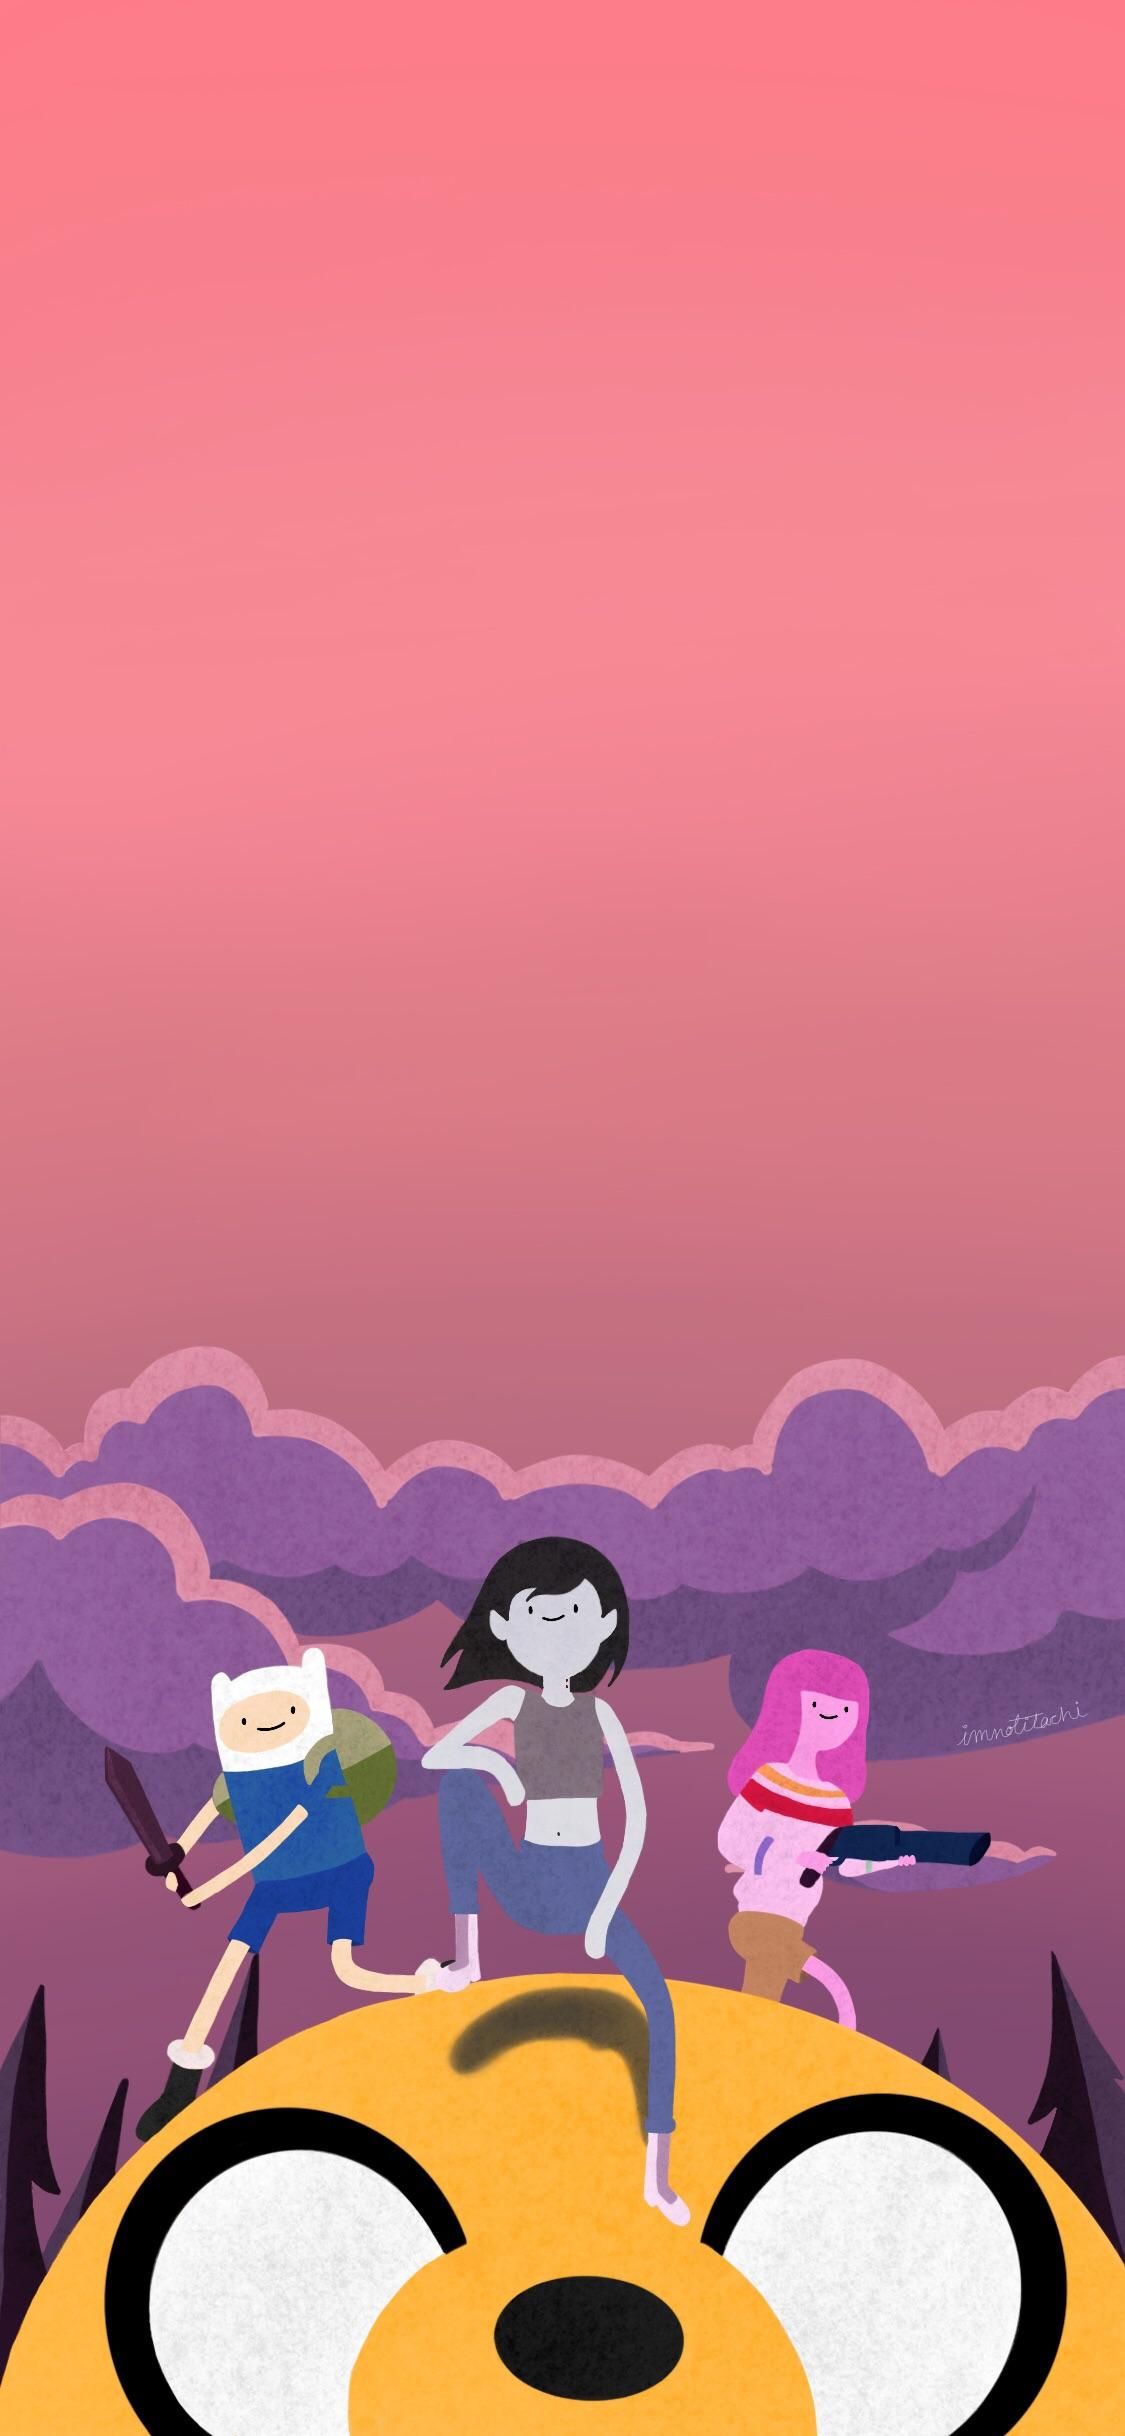 I made a Stakes lock screen, thought y'all might enjoy!, adventuretime. Adventure time wallpaper, Cute cartoon wallpaper, Cartoon wallpaper